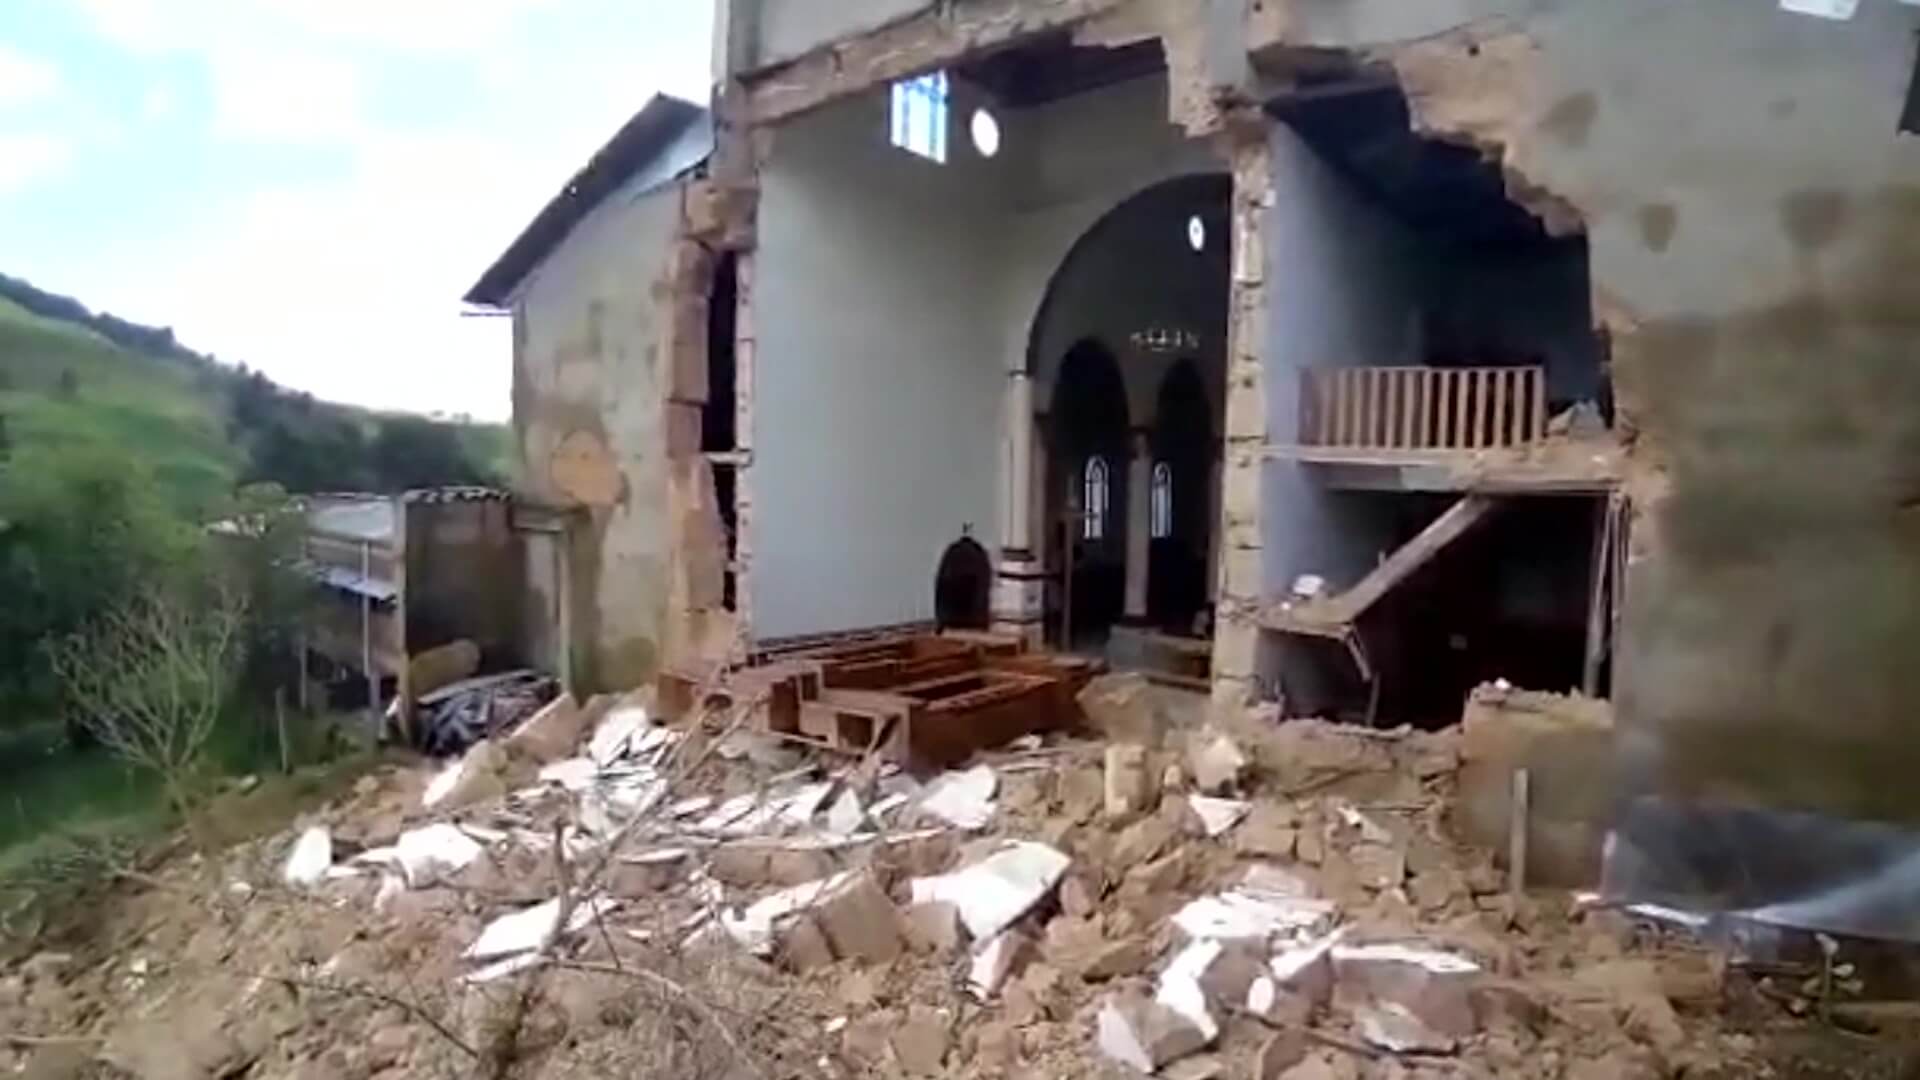 Temple of Aragon partially collapsed